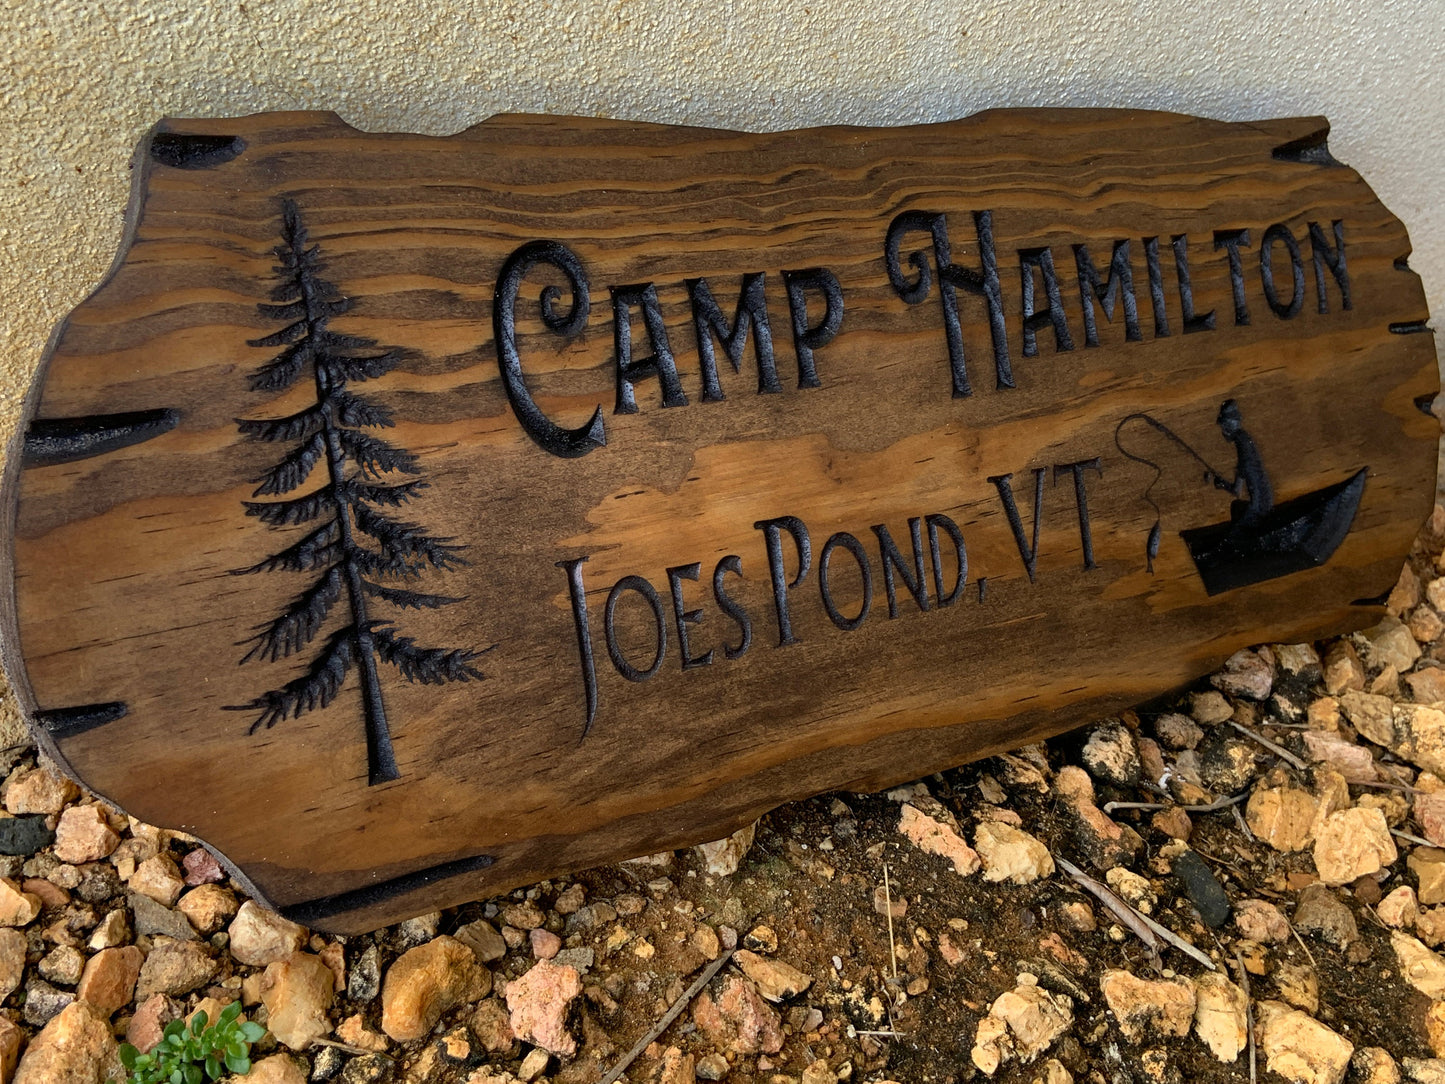 Outdoor Signs, Wooden Carved Cabin Sign, Pine Trees, Custom Wood Sign, Custom Camp Sign, Mountain Home, Personalized Rustic Home Sign